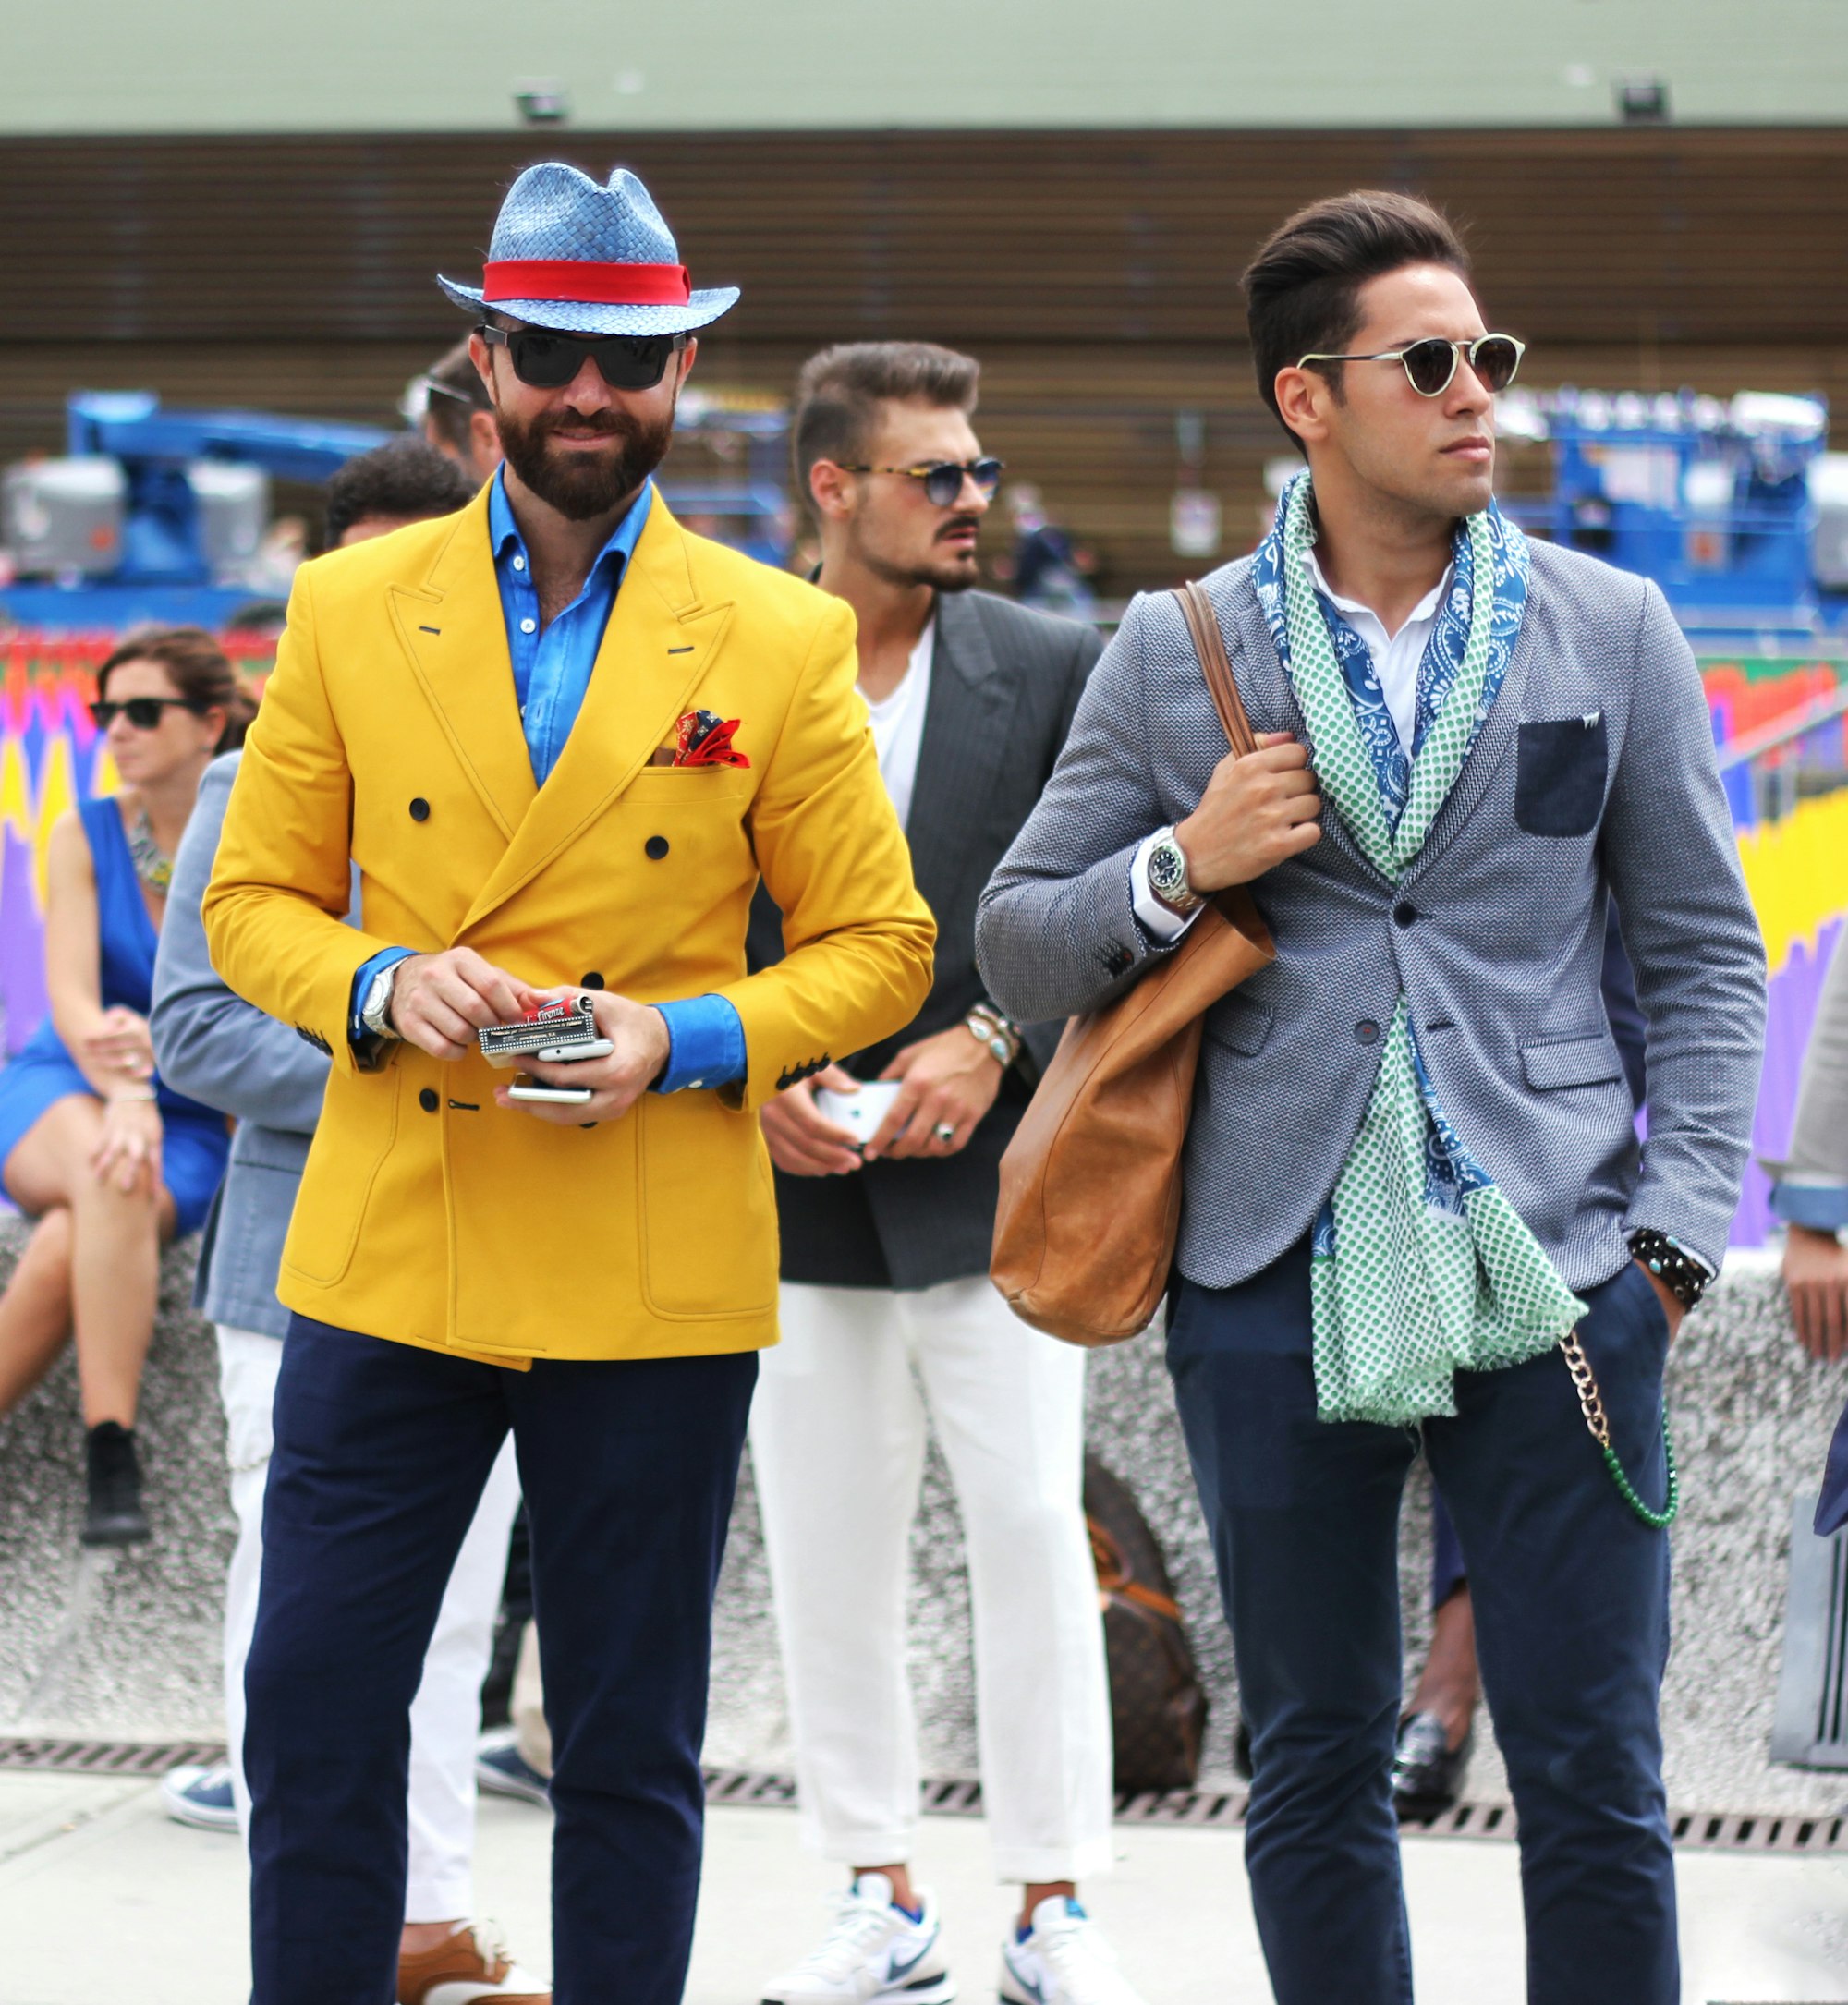 I took this photo while on photography assignment at Pitti Uomo, the largest menswear fashion tradeshow in the world, in Florence, Italy. At Pitti there is a square where key players in mens fashion network with eachother and show their sartorial style.